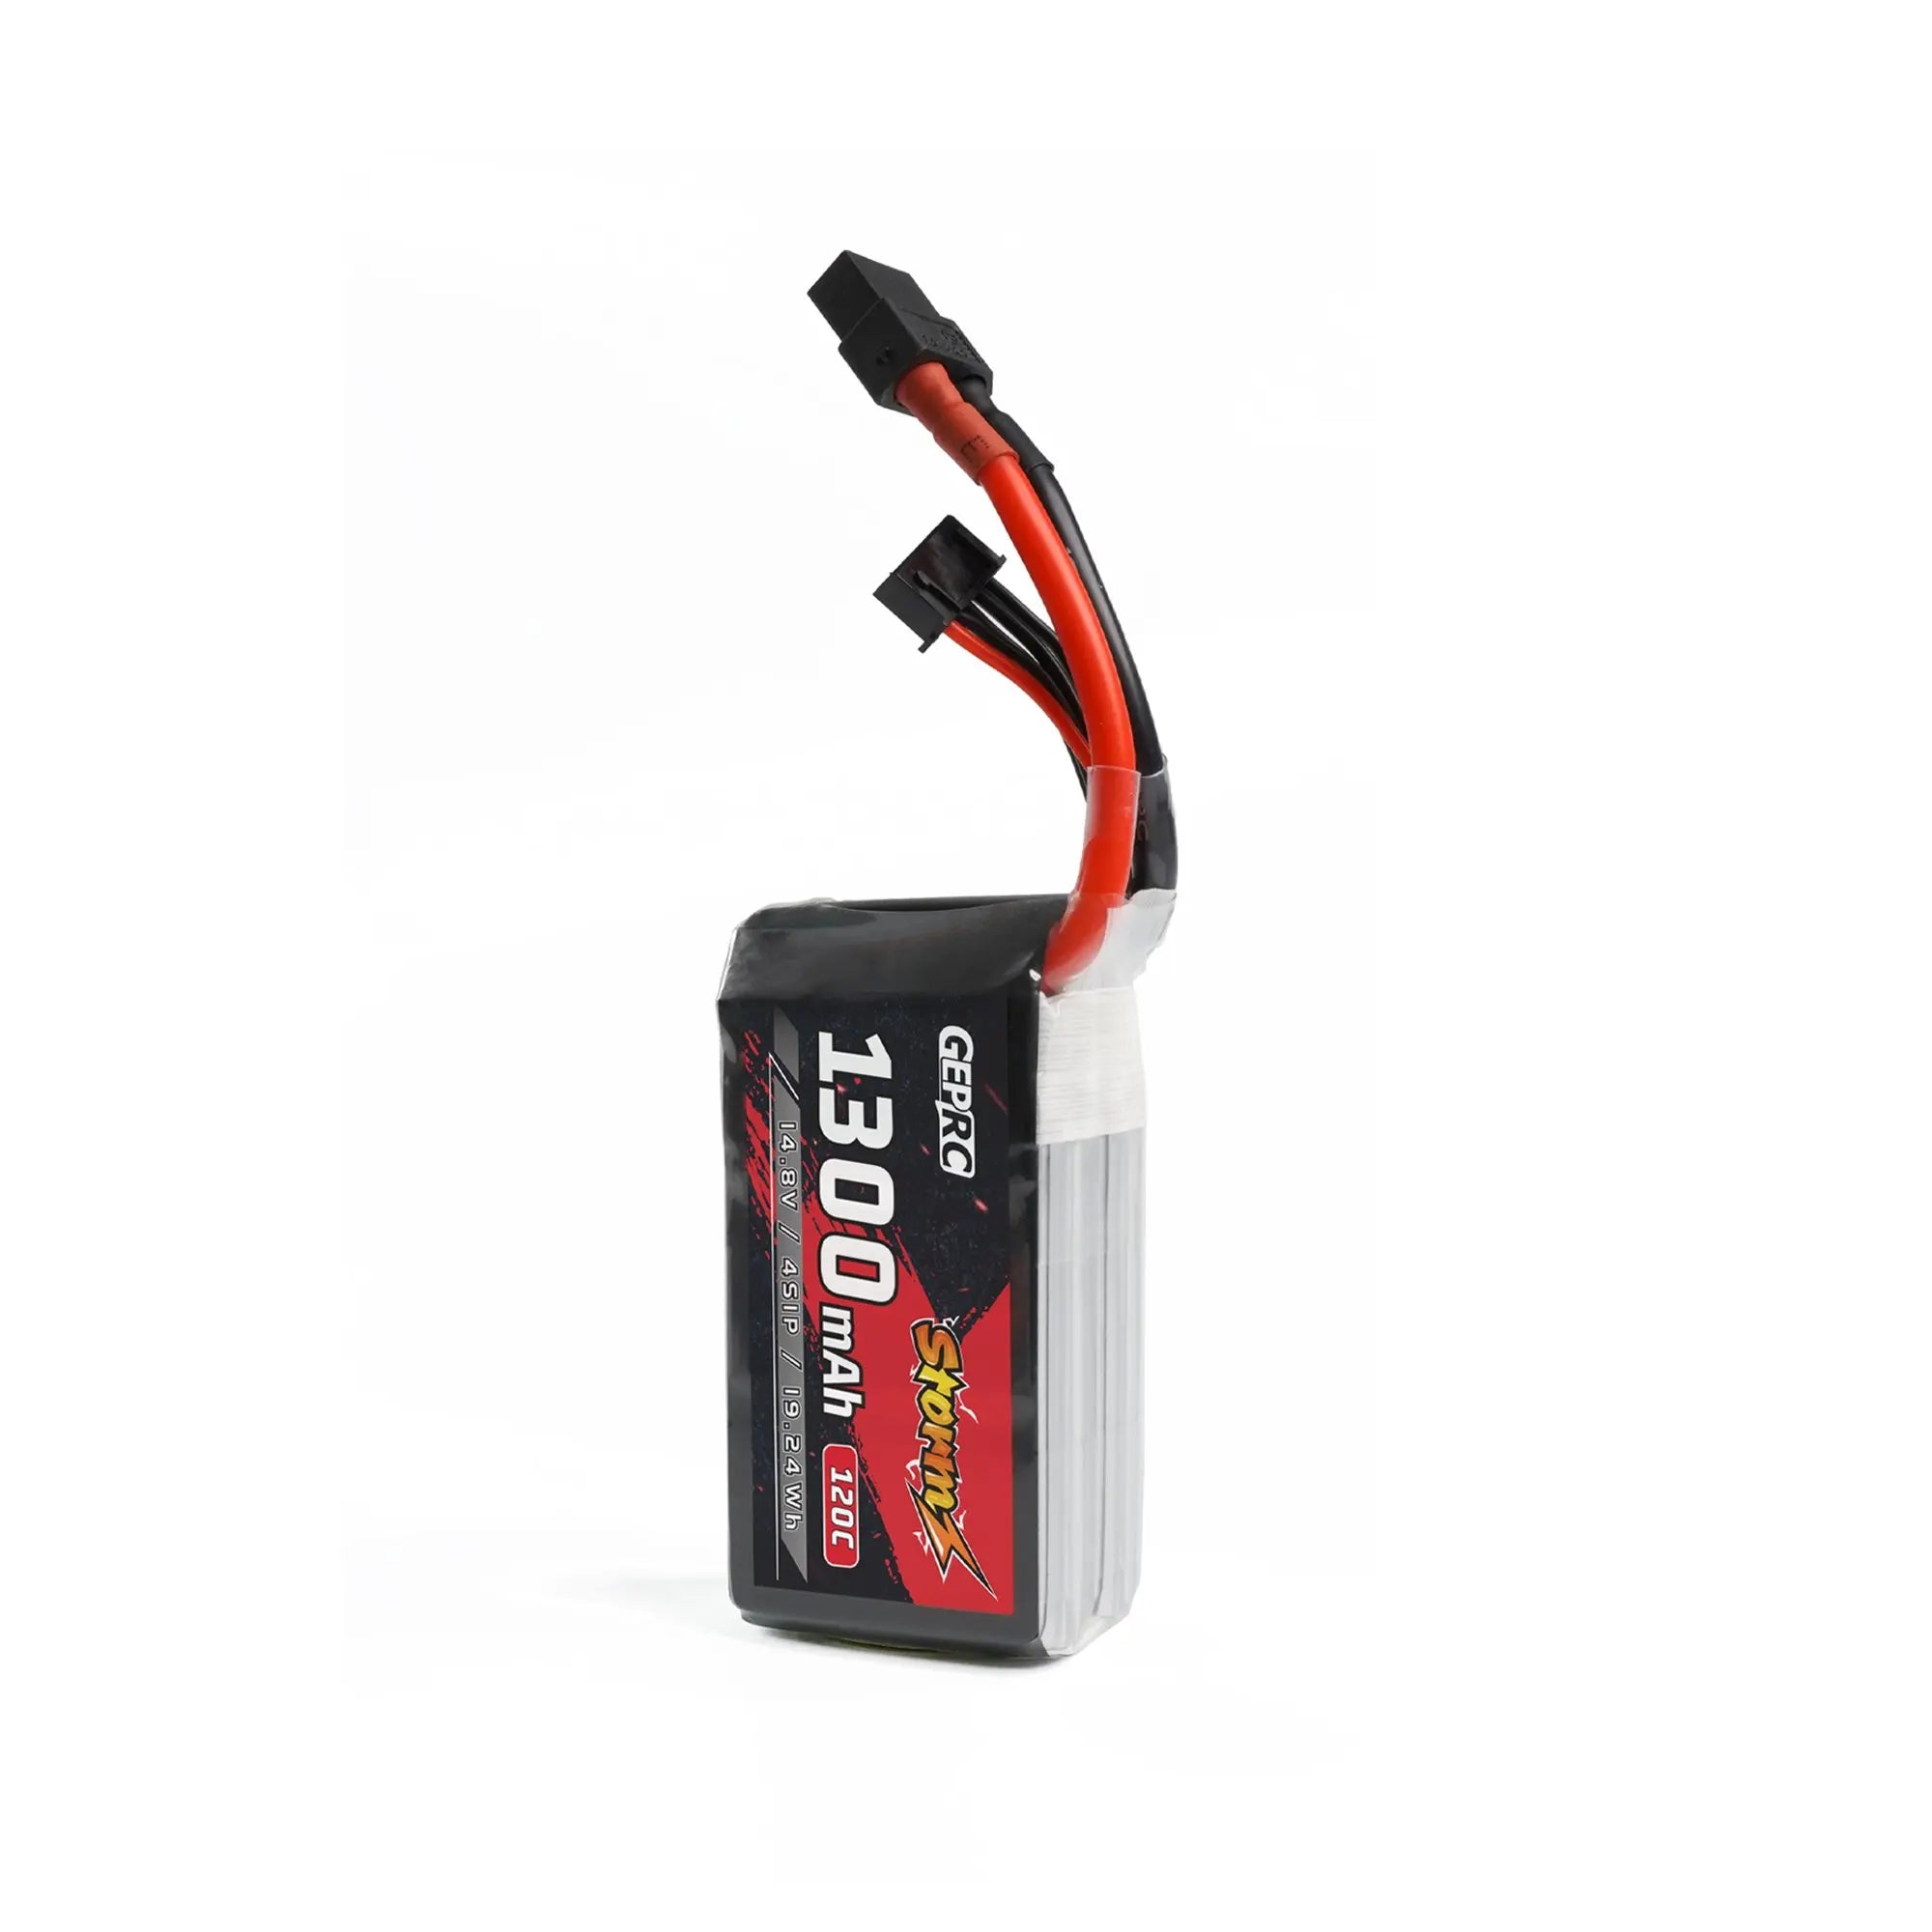 GEPRC Storm 4S 1400mAh 120C Lipo Battery, Storm battery has more energy and longer flight time compared with other ordinary model batteries